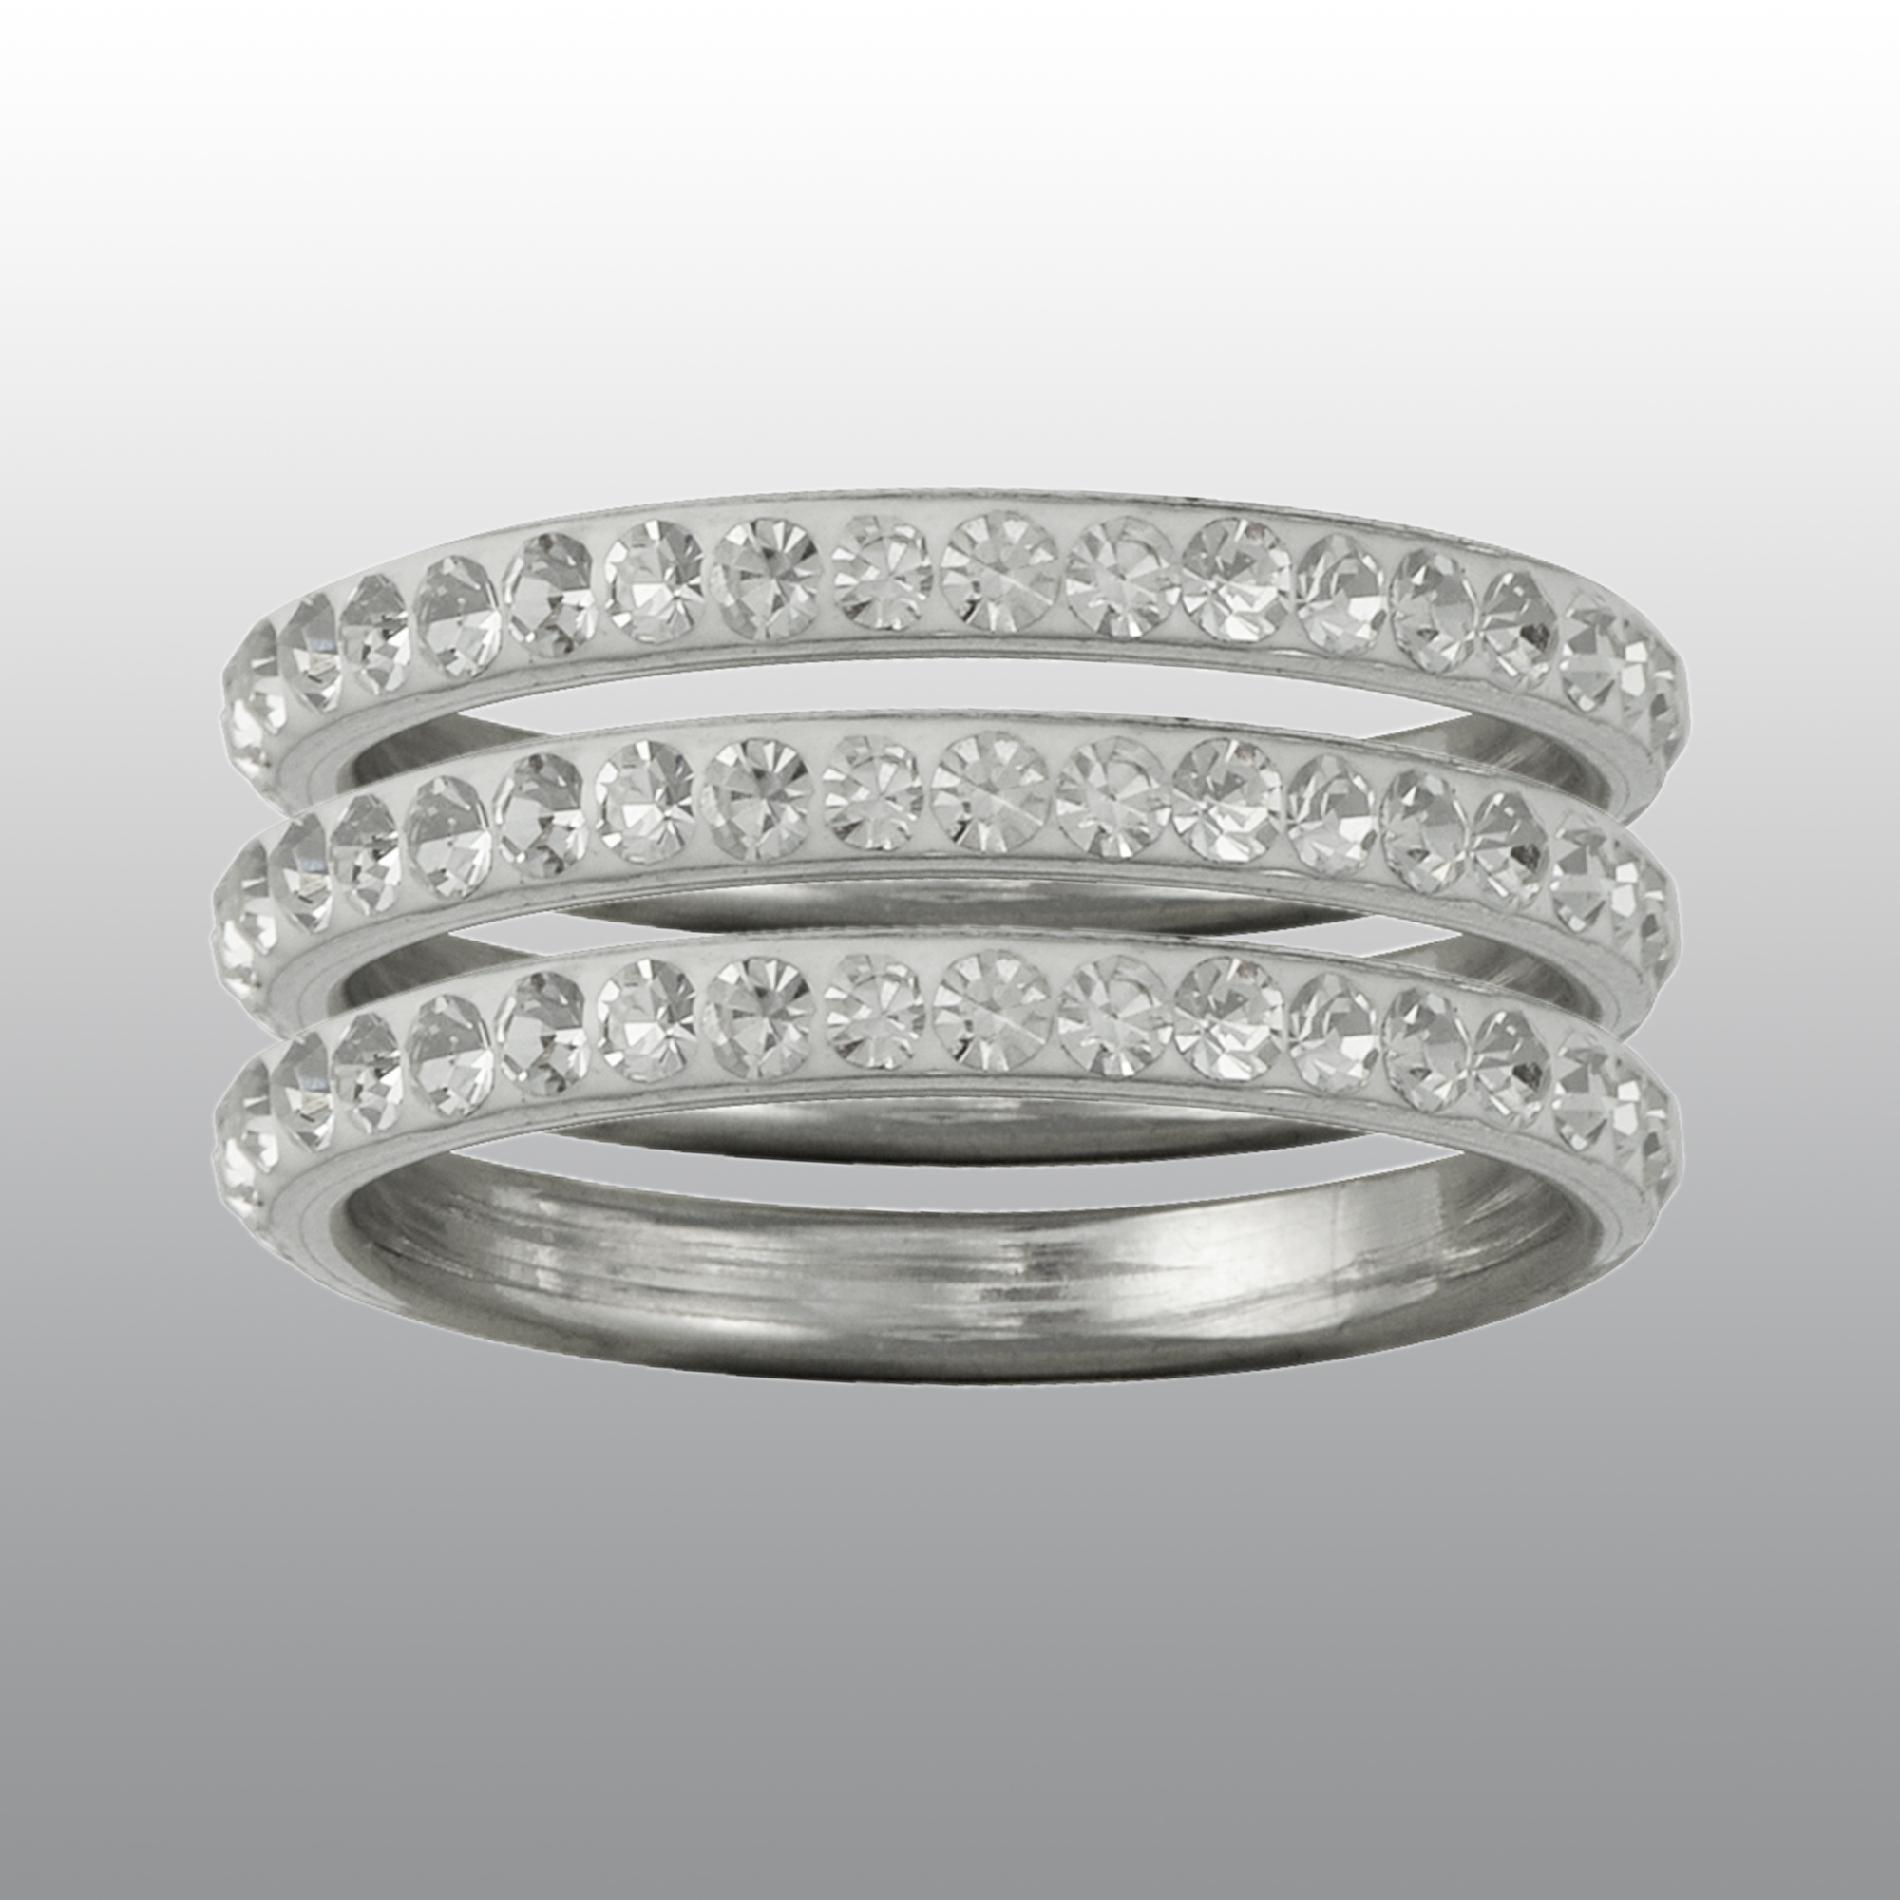 3 Piece Sterling Silver Plated over Brass Pave Crystal Eternity Ring - Size 7 Only